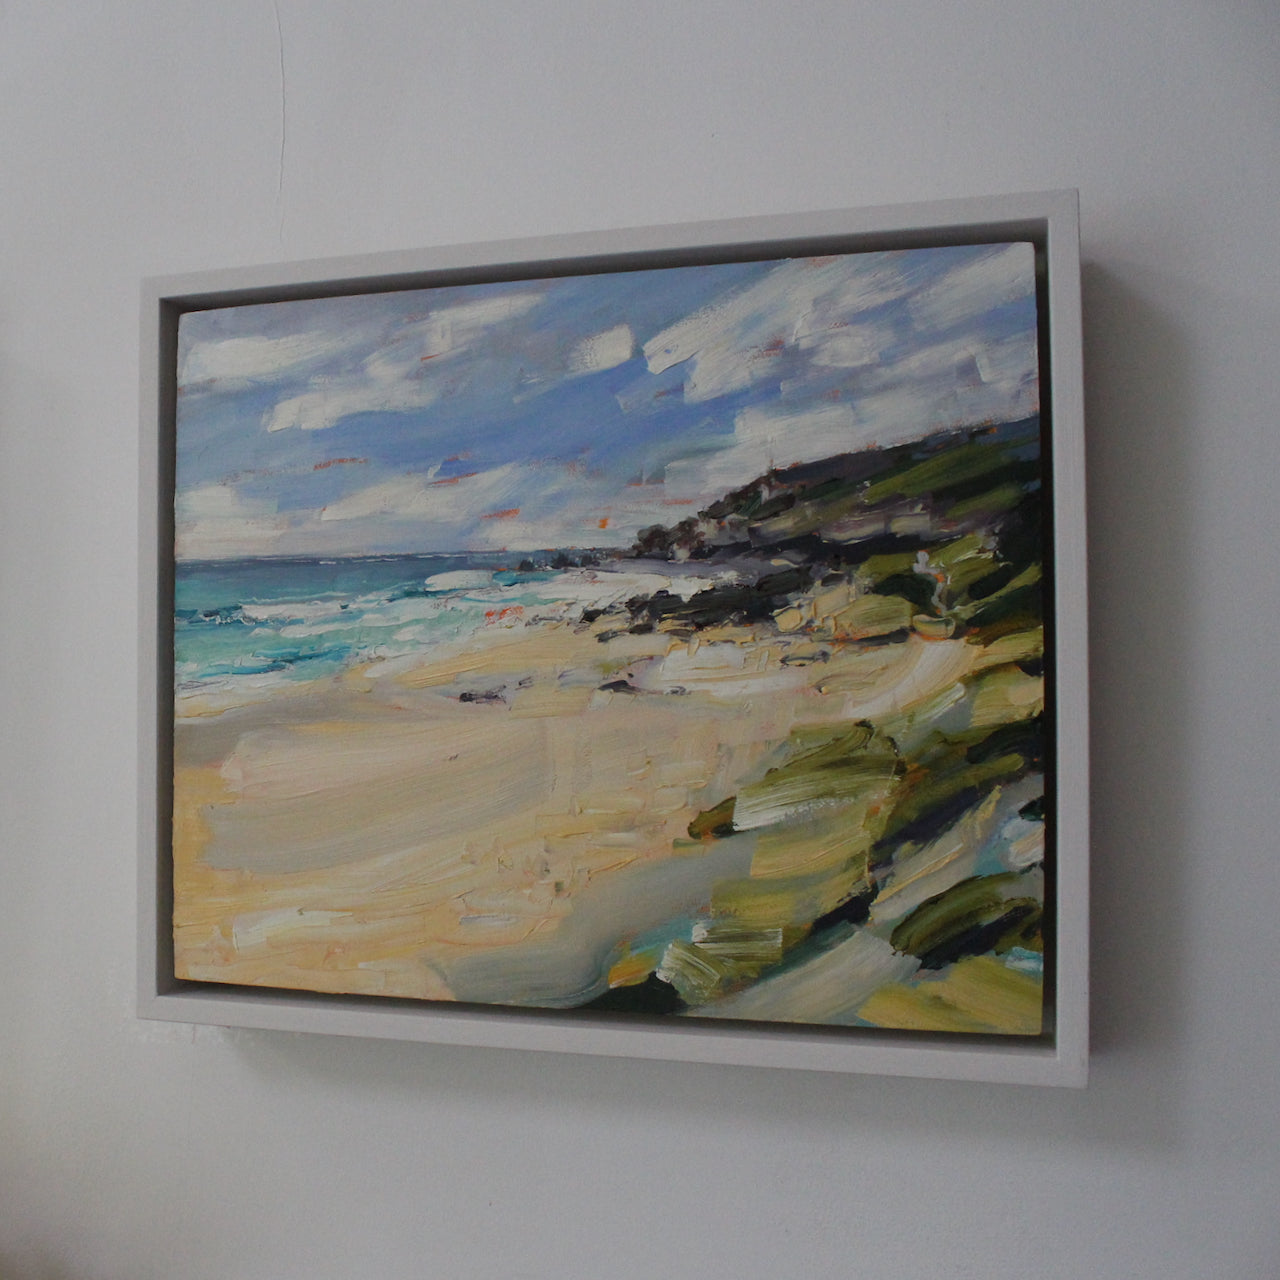 a framed painting of a Cornish beach with pale sand and dark cliffs by Jill Hudson, Cornwall artist  